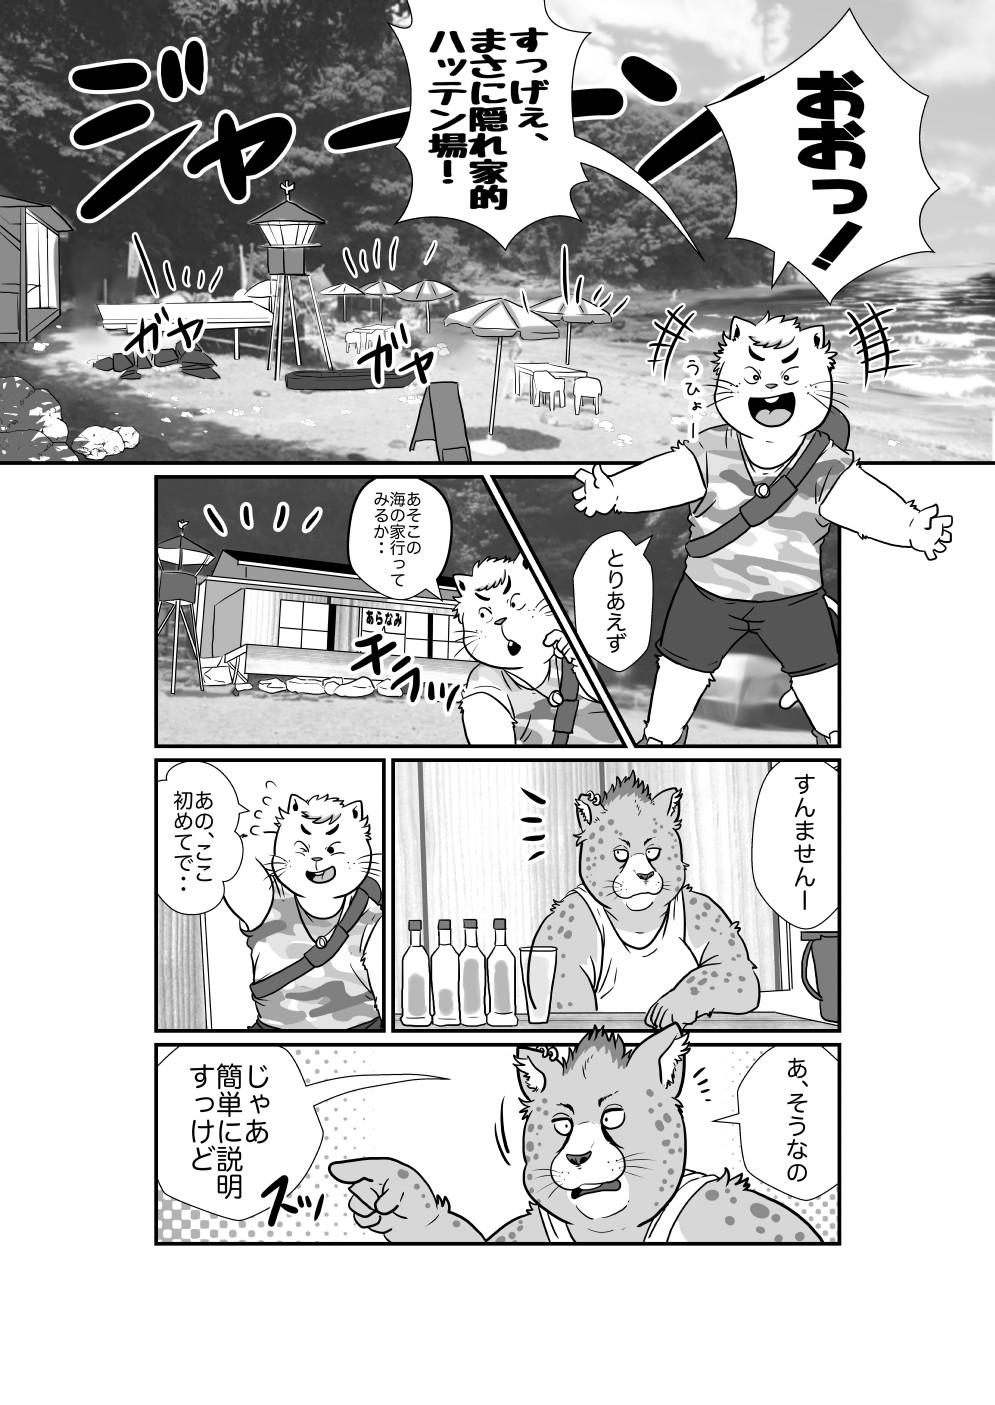 Mom 【ハッテンビーチ】ふぃすとふぁっく【ケモホモ注意】 Parties - Page 4